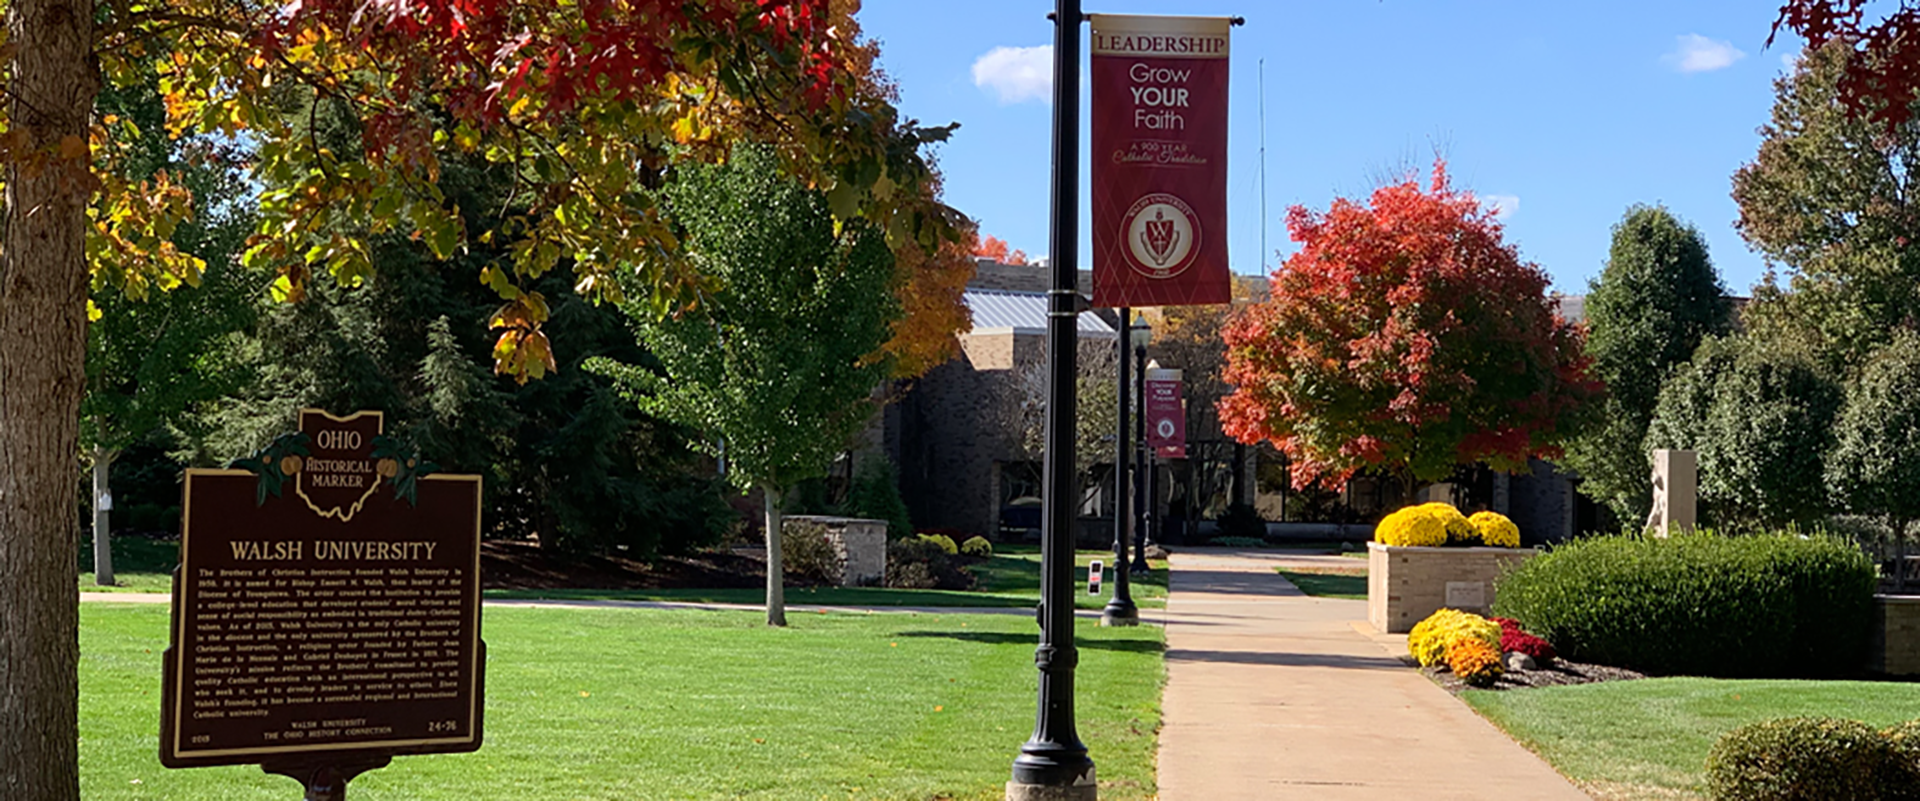 photo of Walsh University campus in the fall